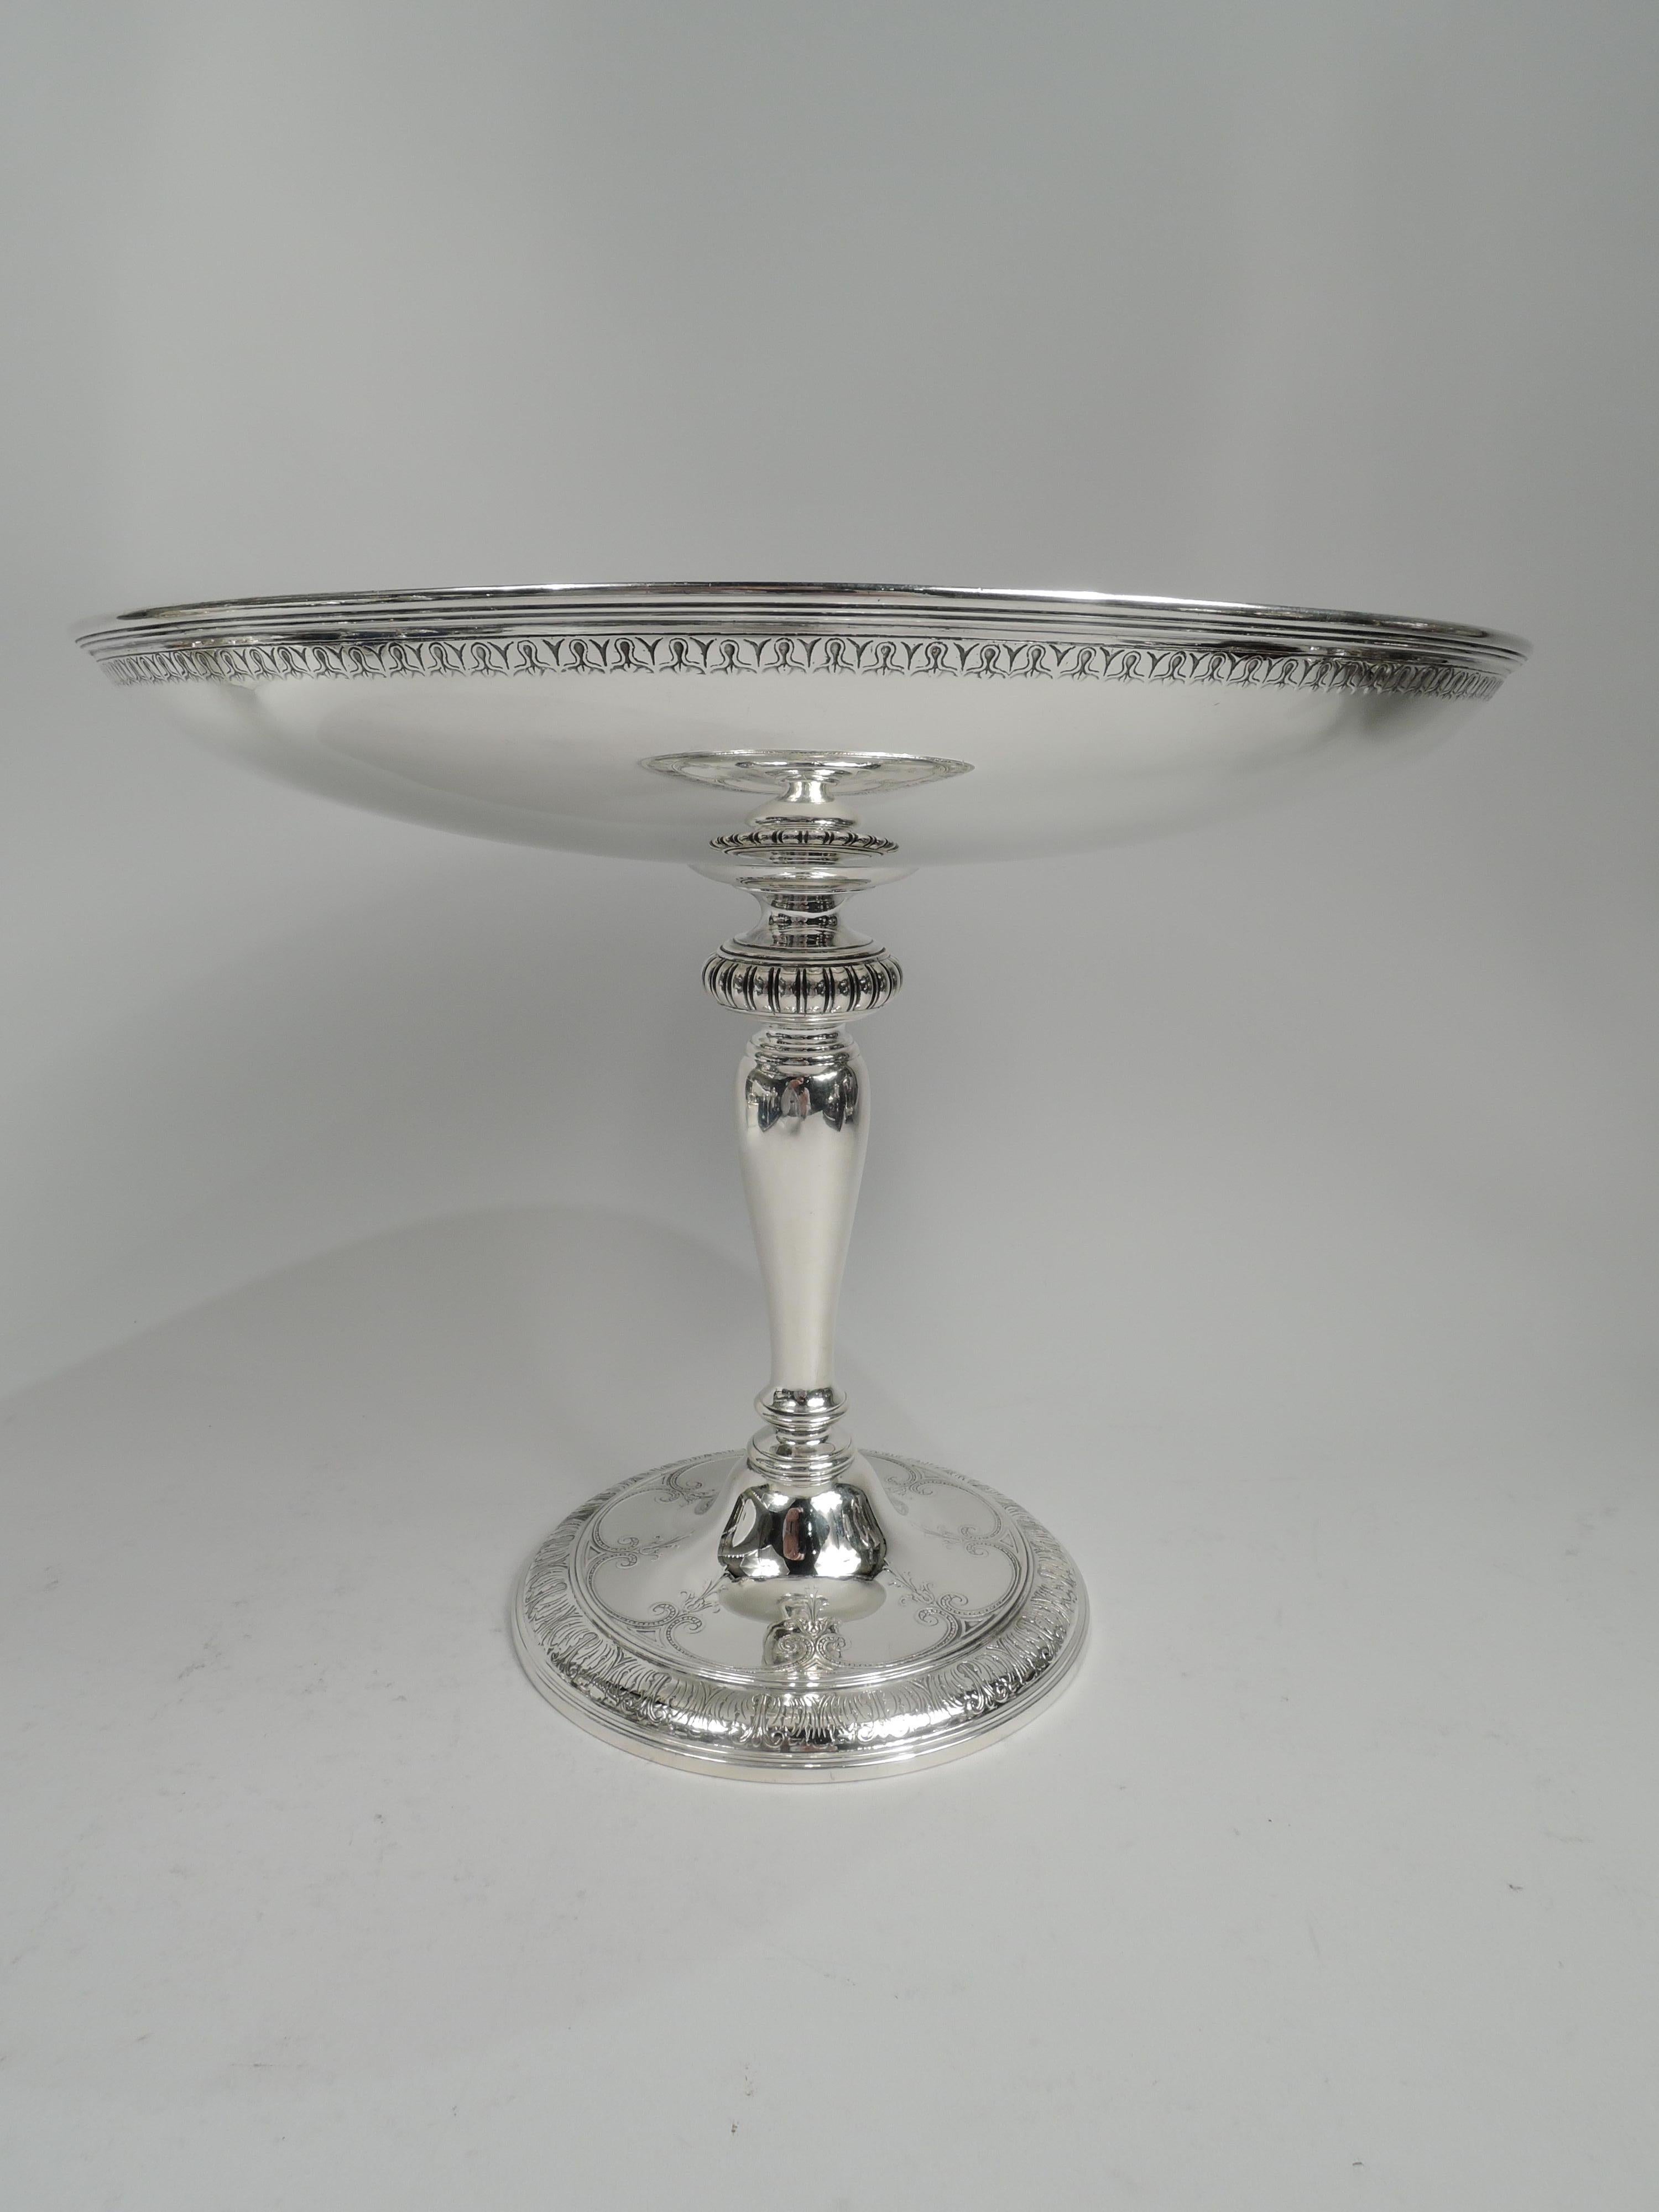 Aesthetic sterling silver compote. Made by Tiffany & Co. in New York, ca 1916. Wide and shallow bowl on baluster shaft with gadrooned knop and raised foot. Acid etched ornament. In bowl well a scroll and leaf pattern surrounding central rondel with